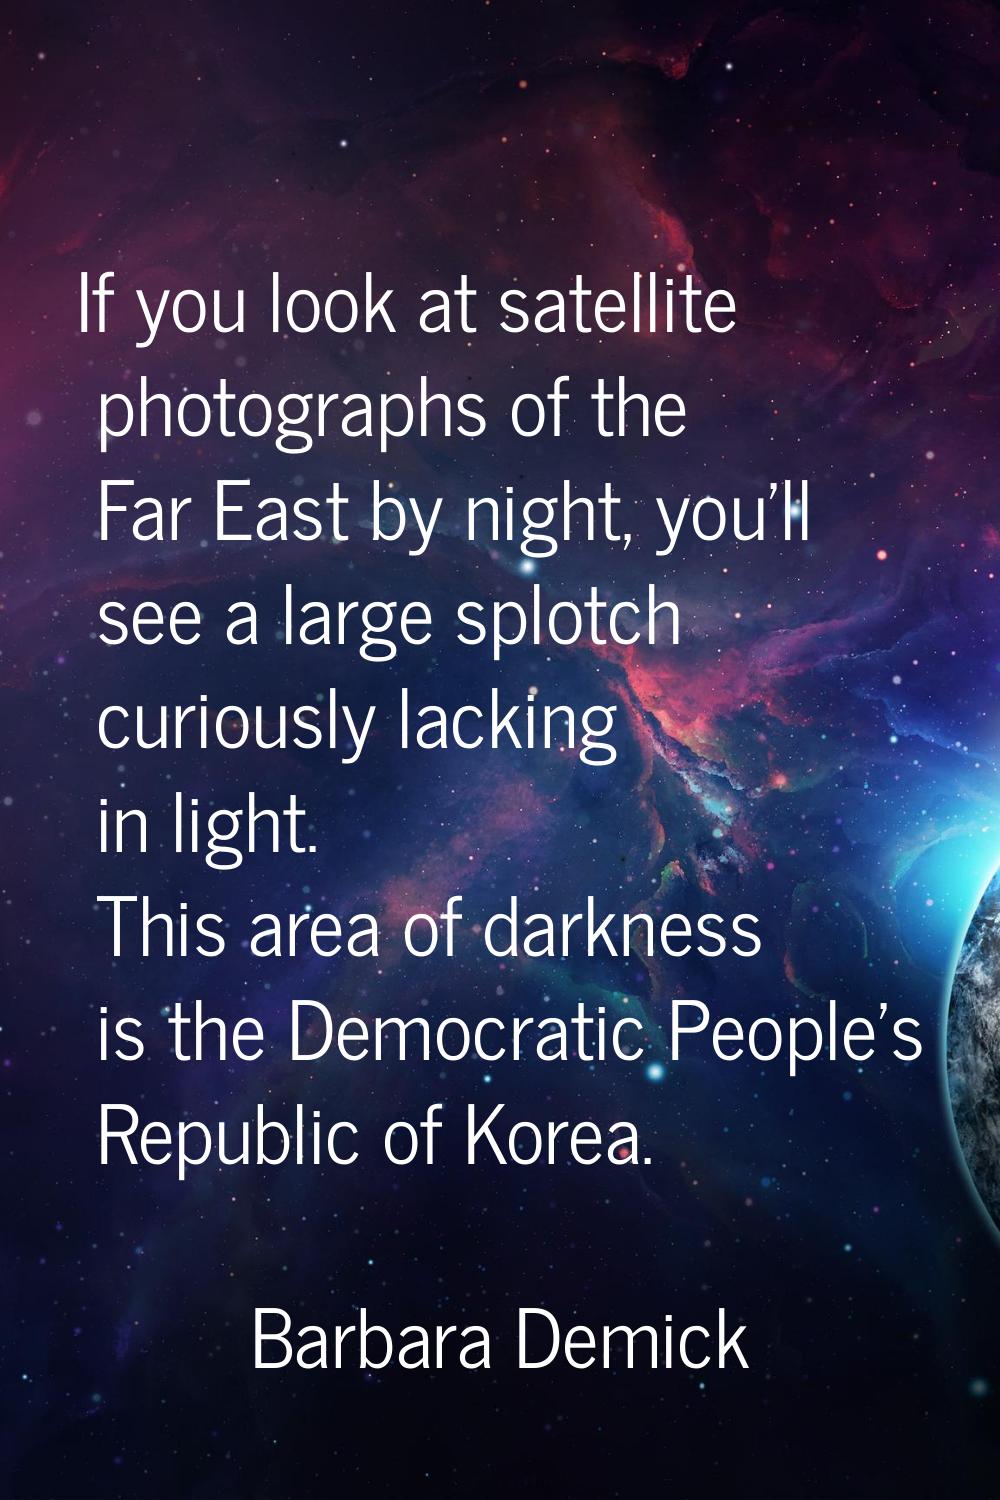 If you look at satellite photographs of the Far East by night, you'll see a large splotch curiously